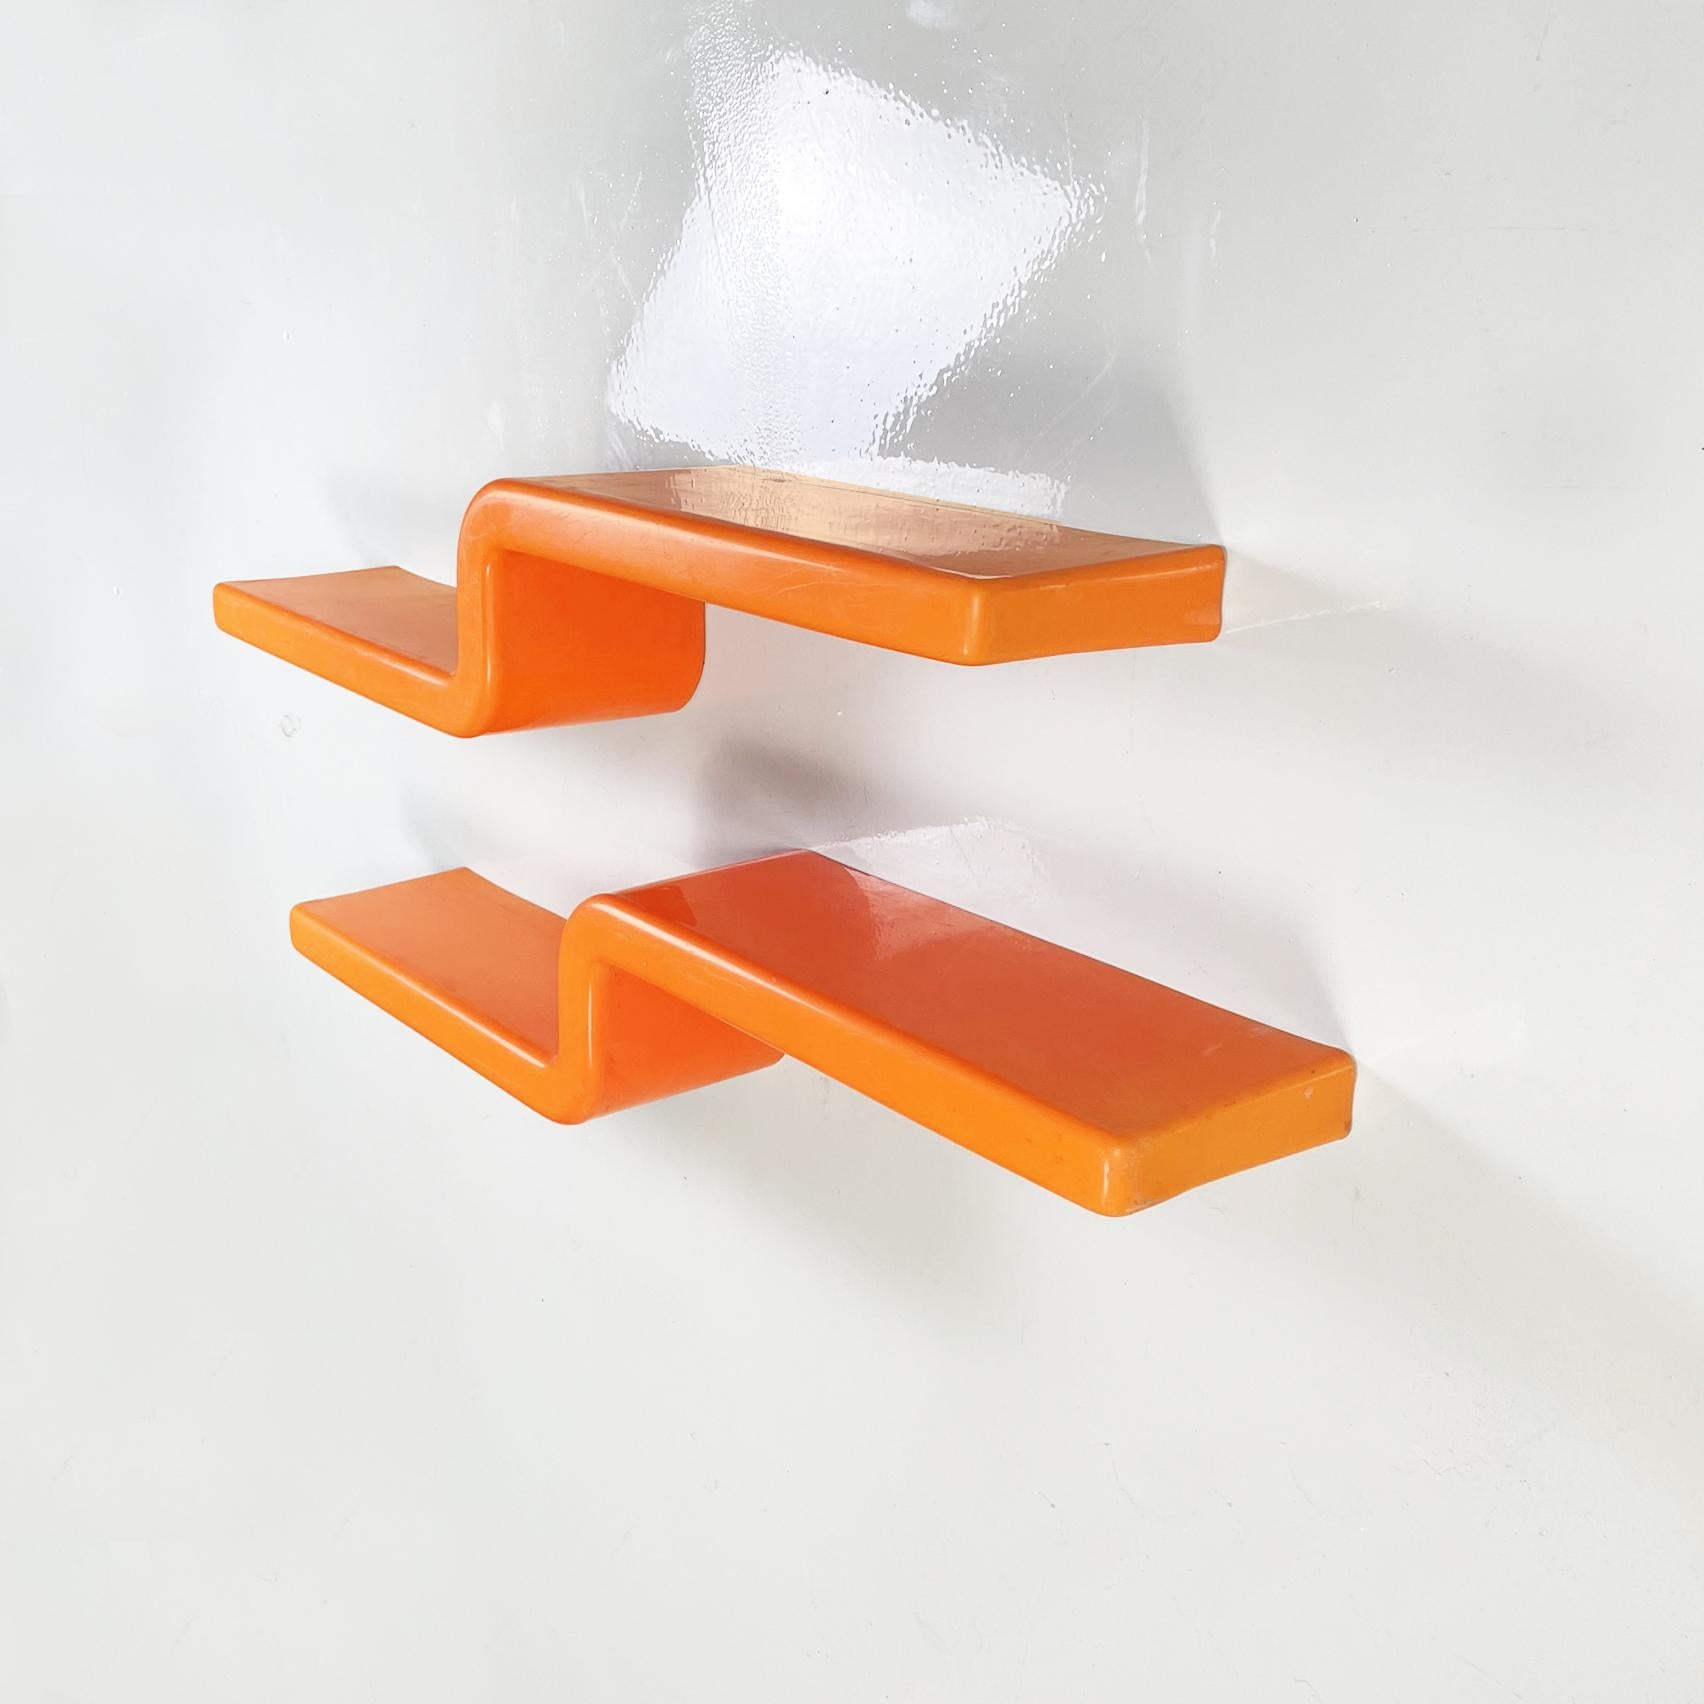 Italian space age S-shaped shelves in bright orange plastic, 1970s
Fantastic pair of S-shaped shelves with rounded profile and corners, in bright orange plastic. In space age style.
1970s.
Good conditions, they show various signs of use.
The